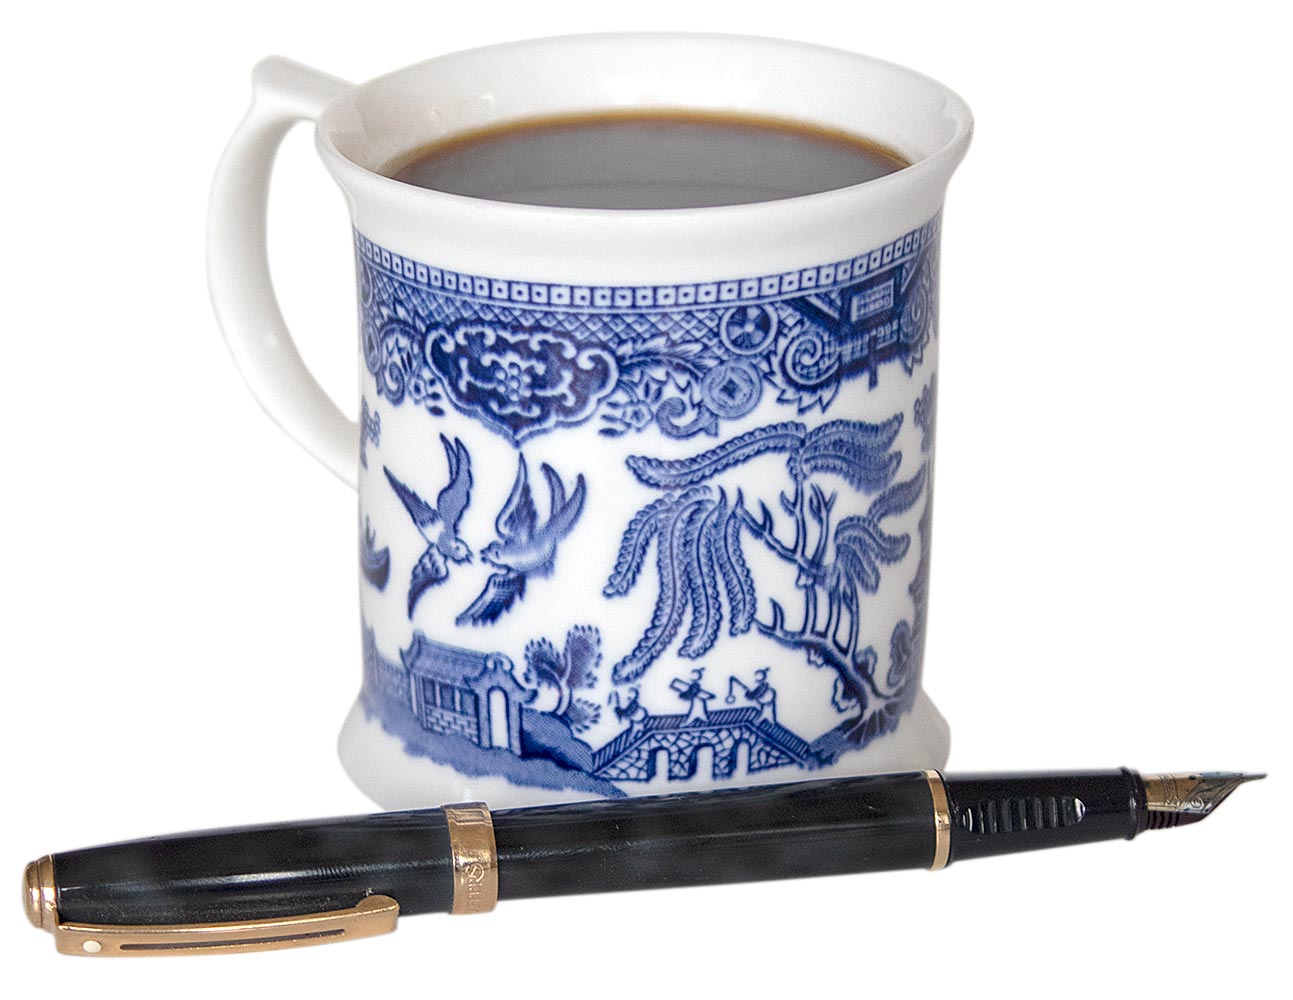 Mug of coffee with a fountain pen.